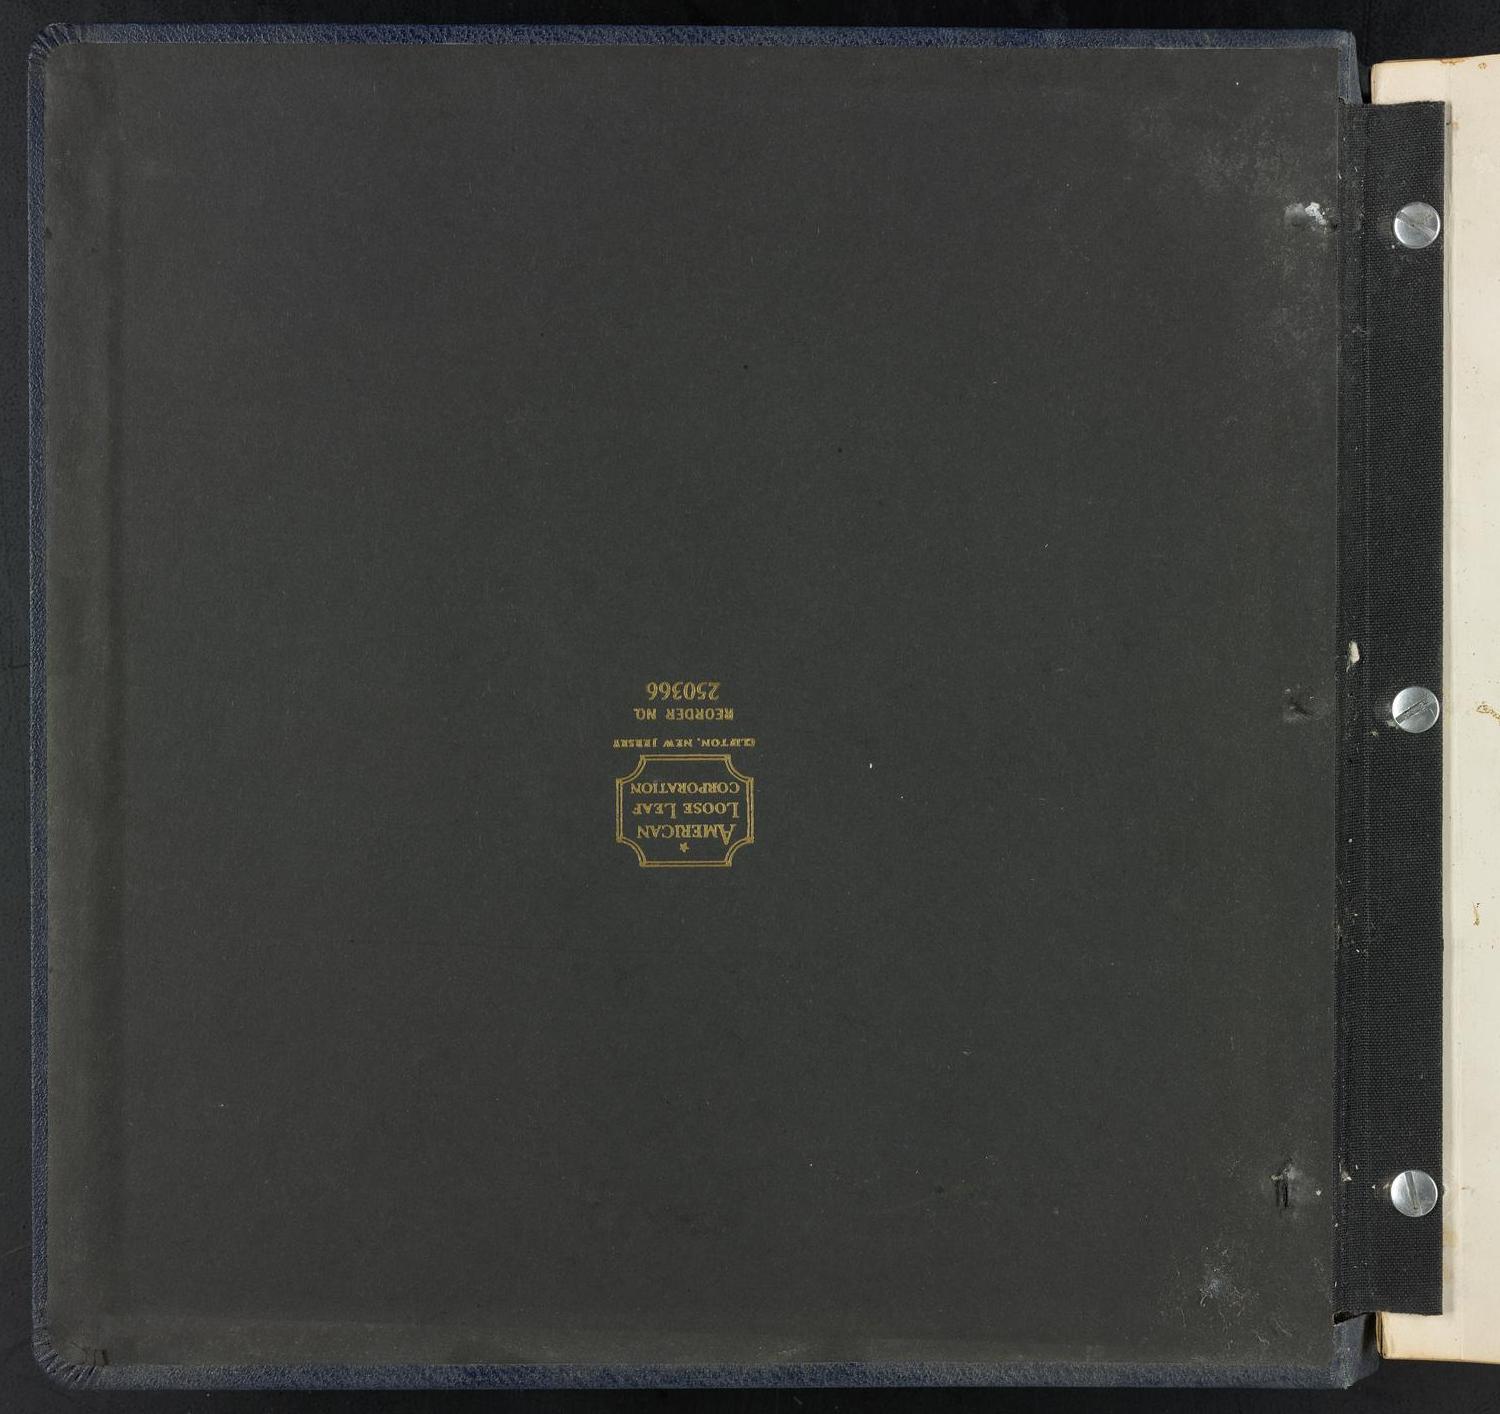 [Scrapbook of John Briggs personal life, business and travel, 1961-1965]
                                                
                                                    [Sequence #]: 170 of 171
                                                